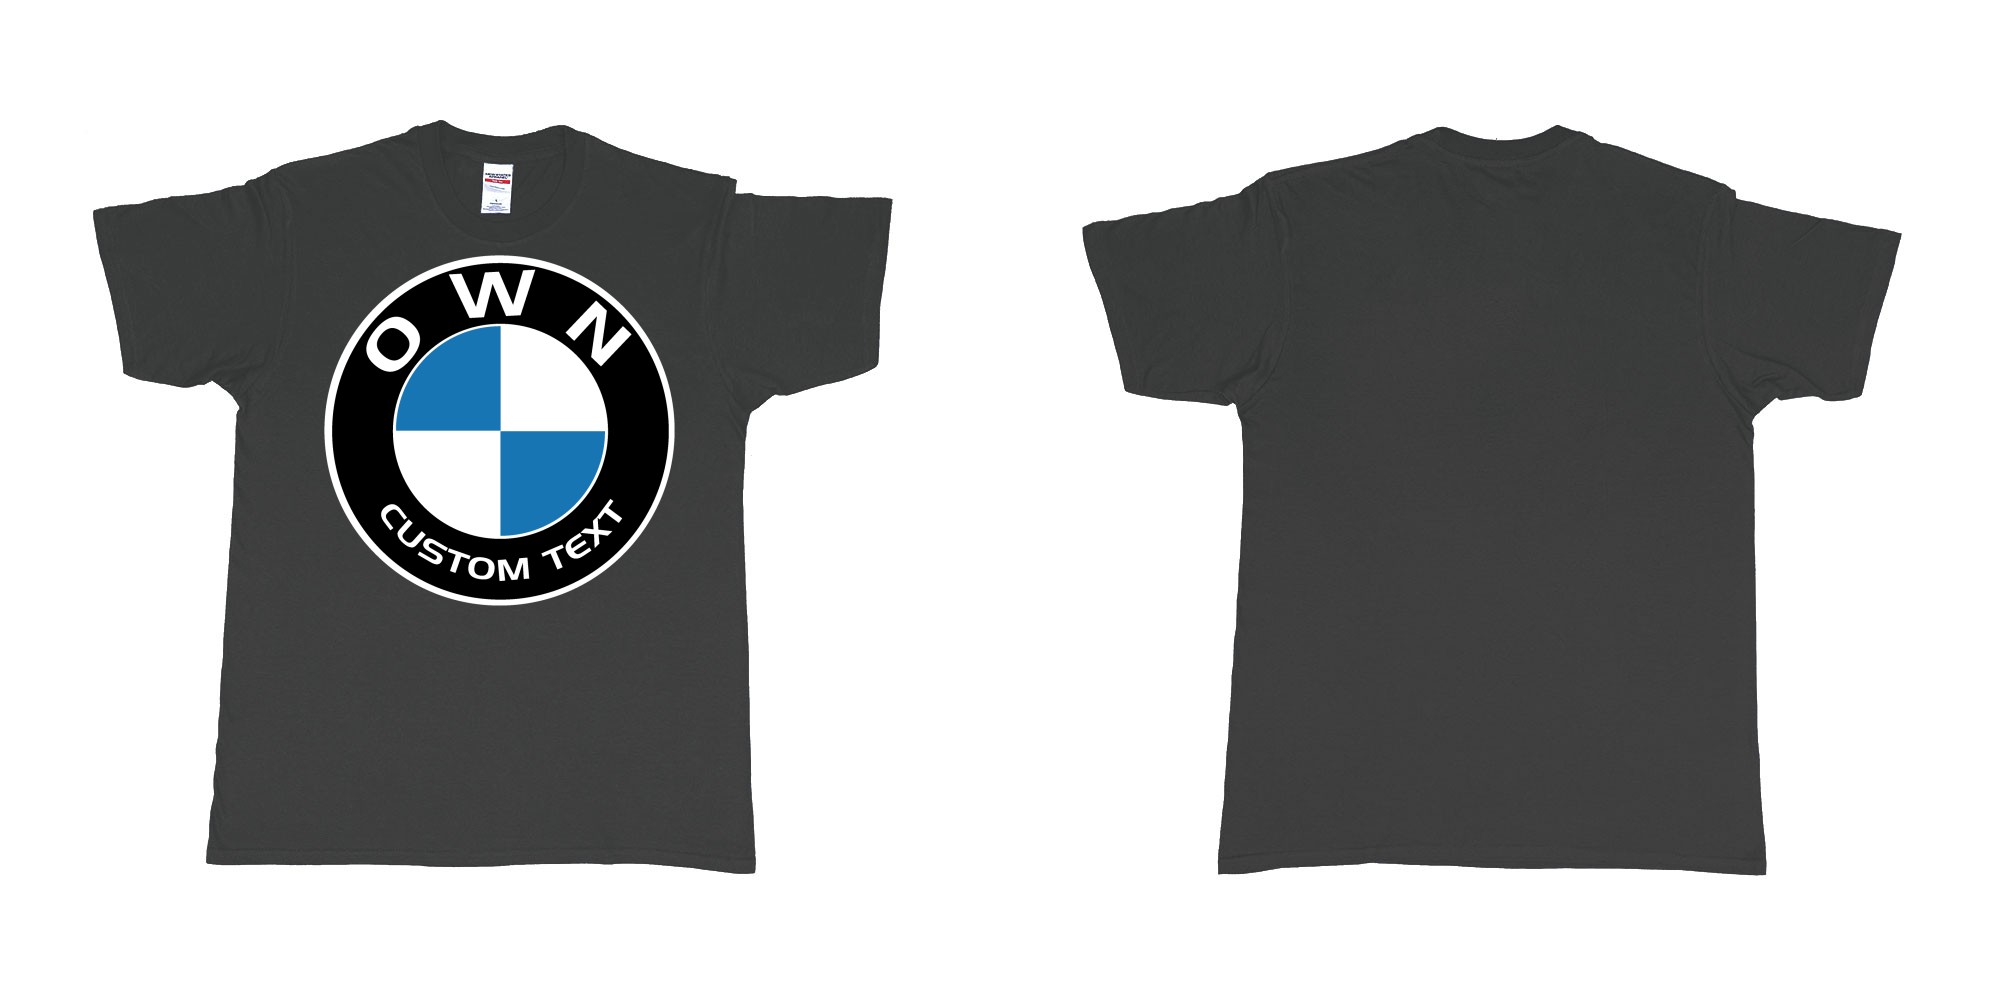 Custom tshirt design BMW logo custom text tshirt printing in fabric color black choice your own text made in Bali by The Pirate Way